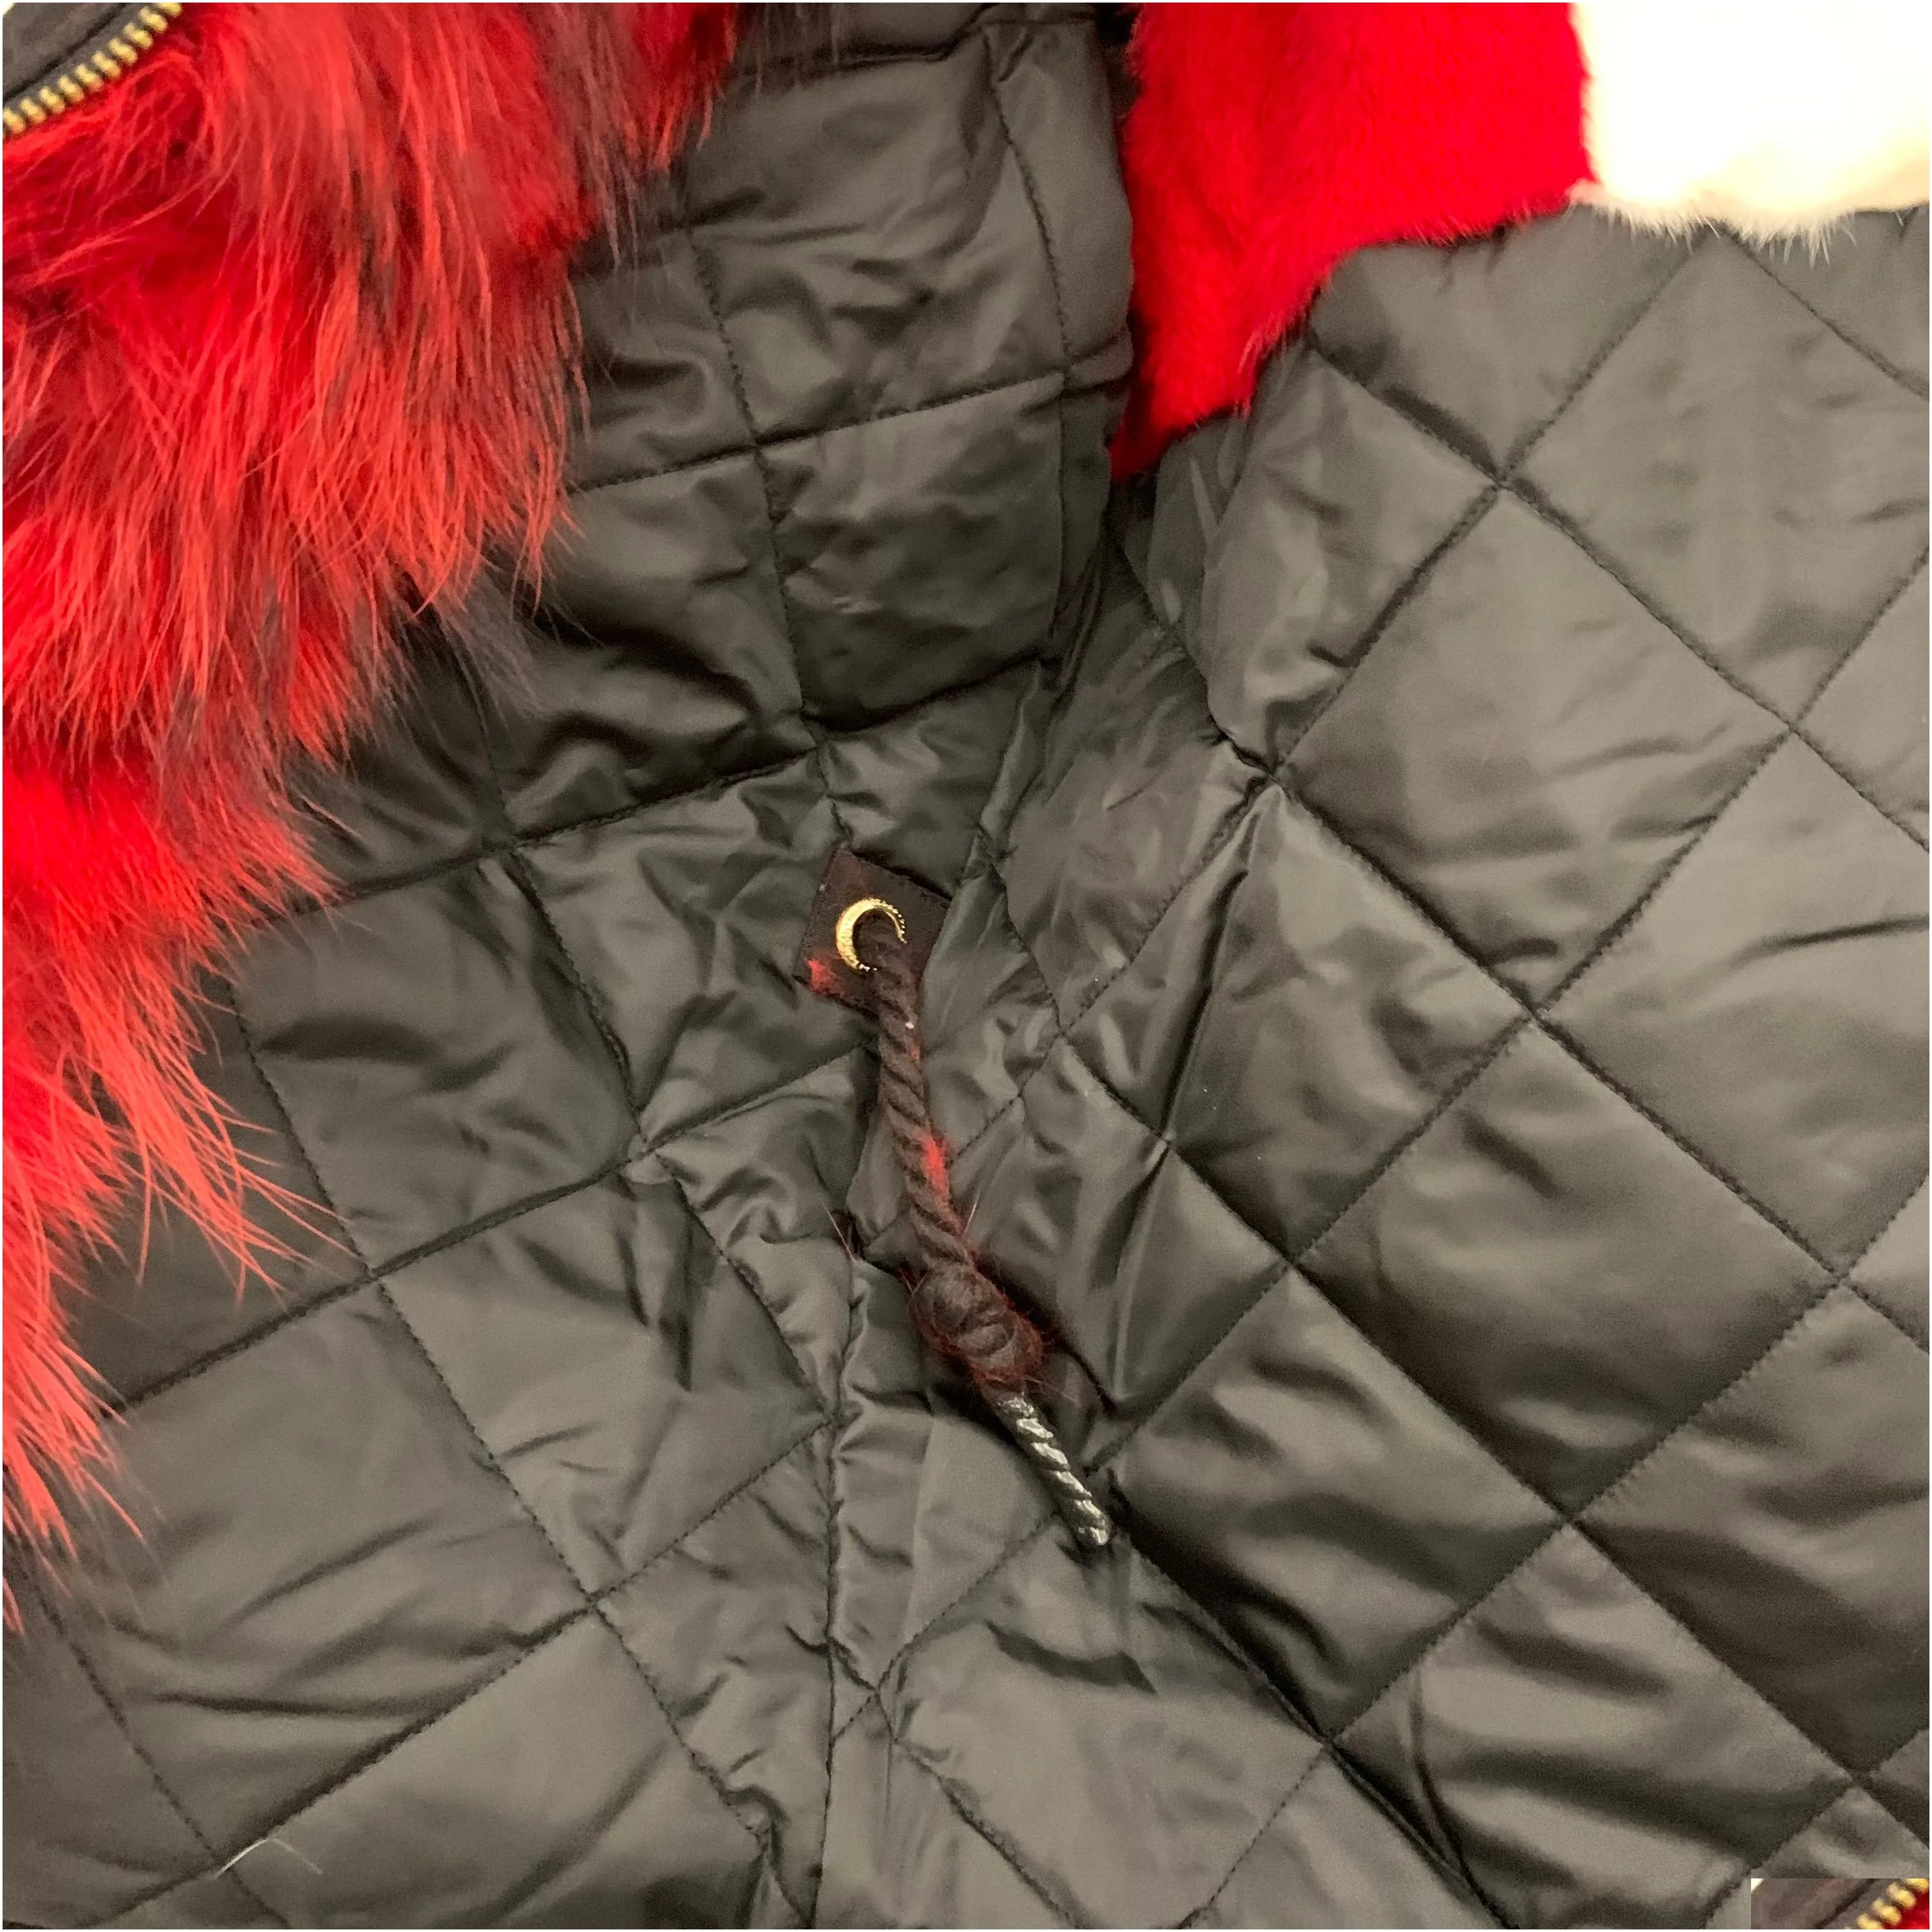 designer mens jackets big real fur with logo thick warm outdoors Casual puffer jacket New listing Autumn Winter luxury clothing Brand coat winter jacket s m